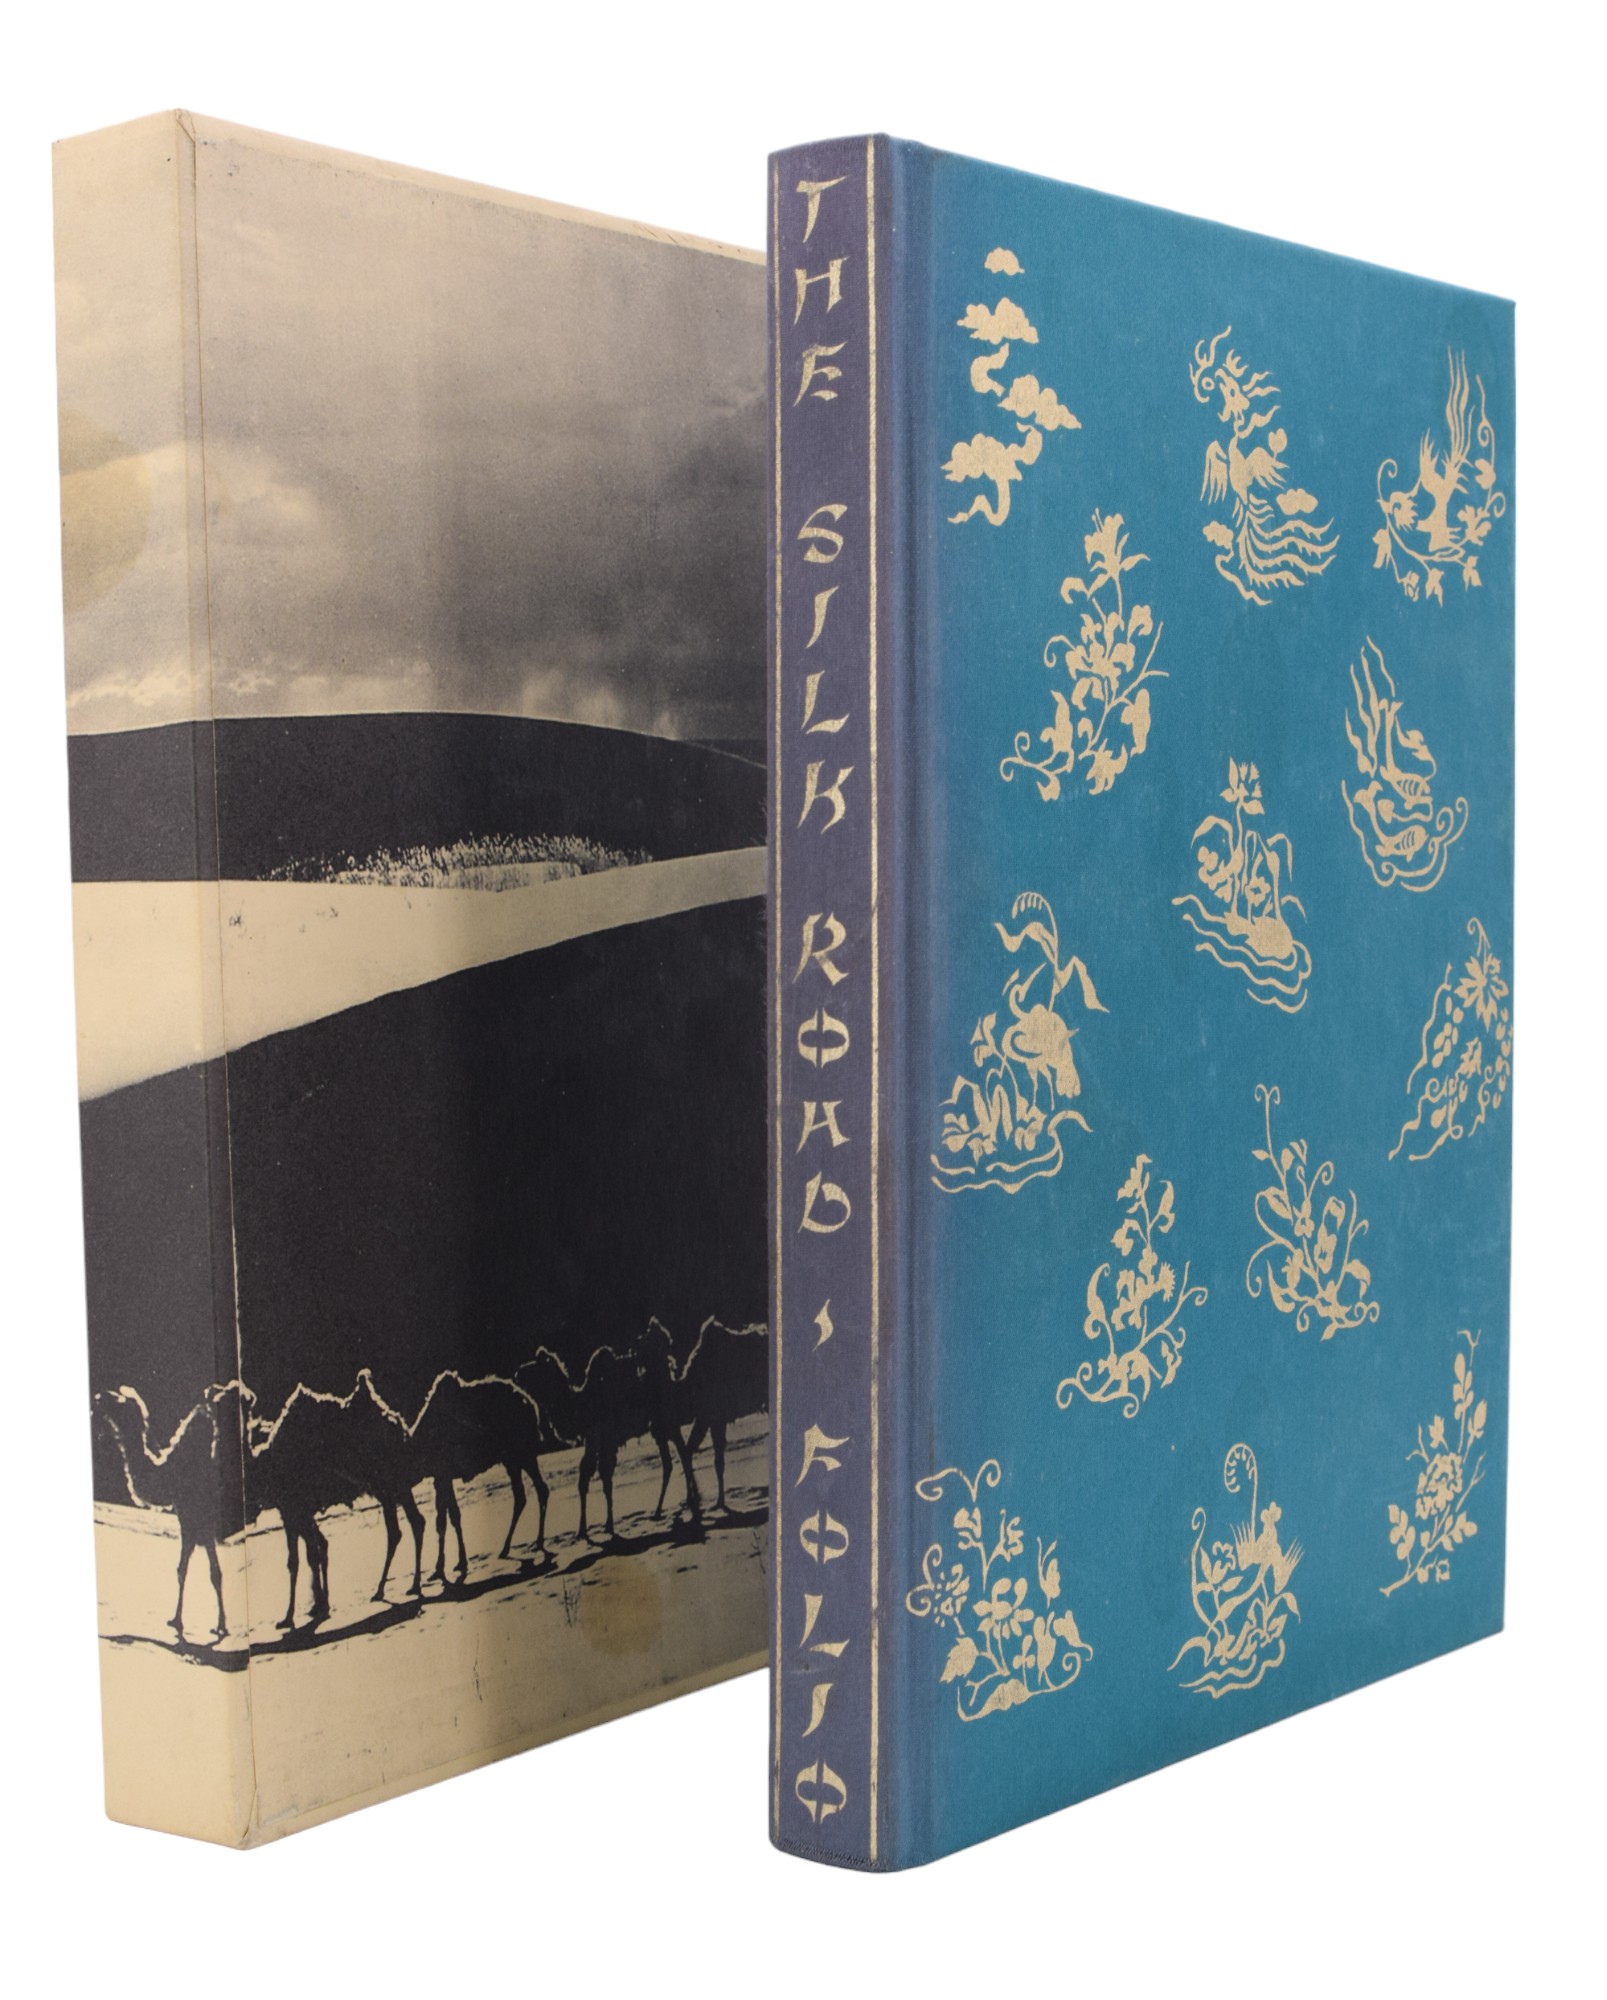 Seven Folio Society publications in slip cases, including Frances Wood, "The Silk Road", 2002; - Image 14 of 31